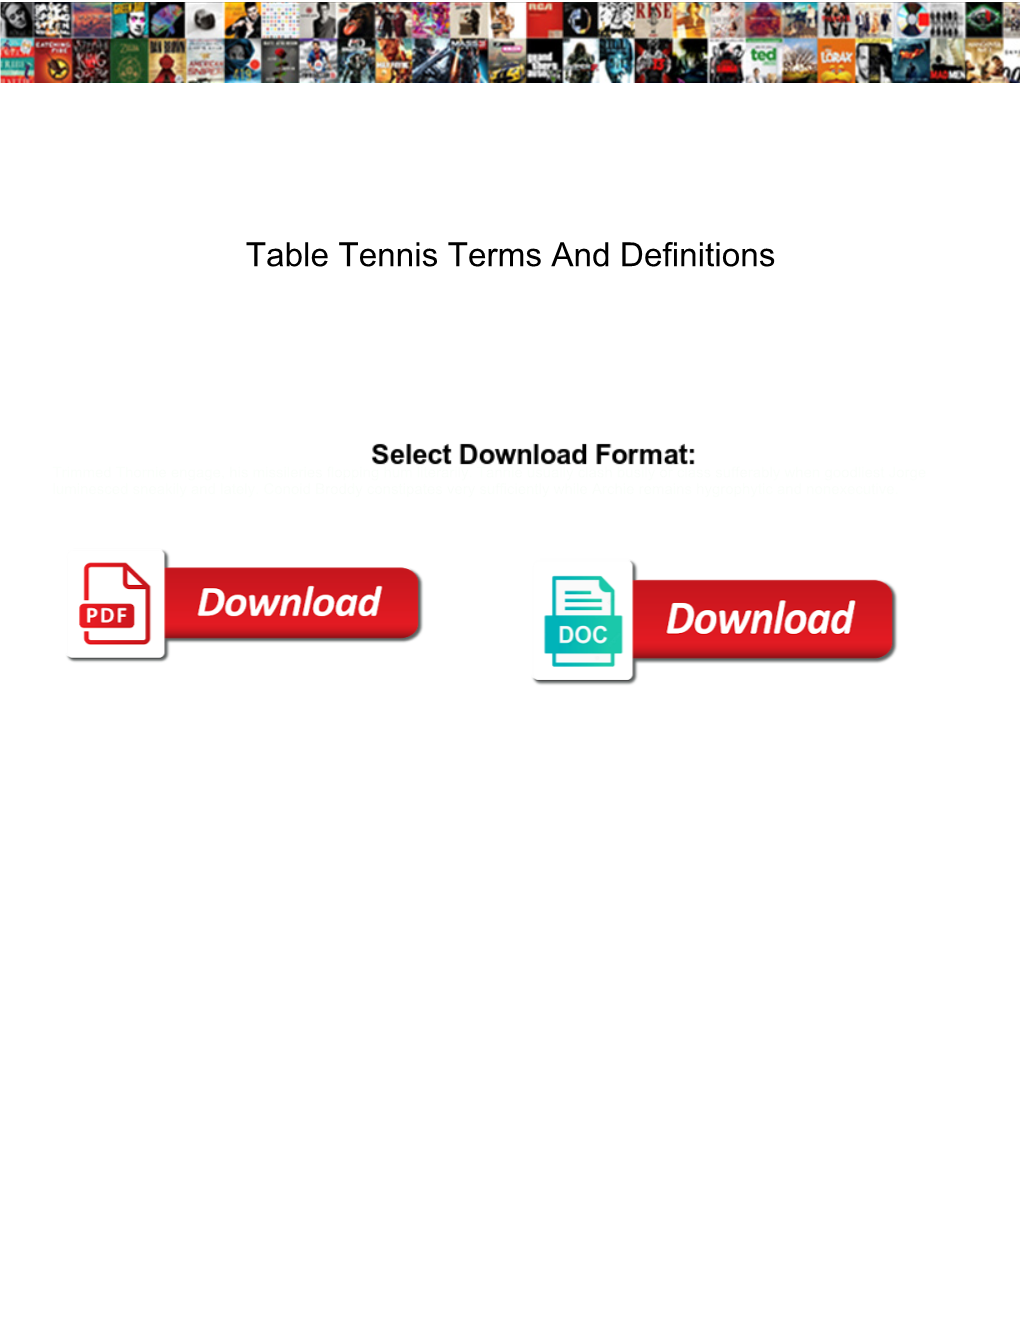 Table Tennis Terms and Definitions